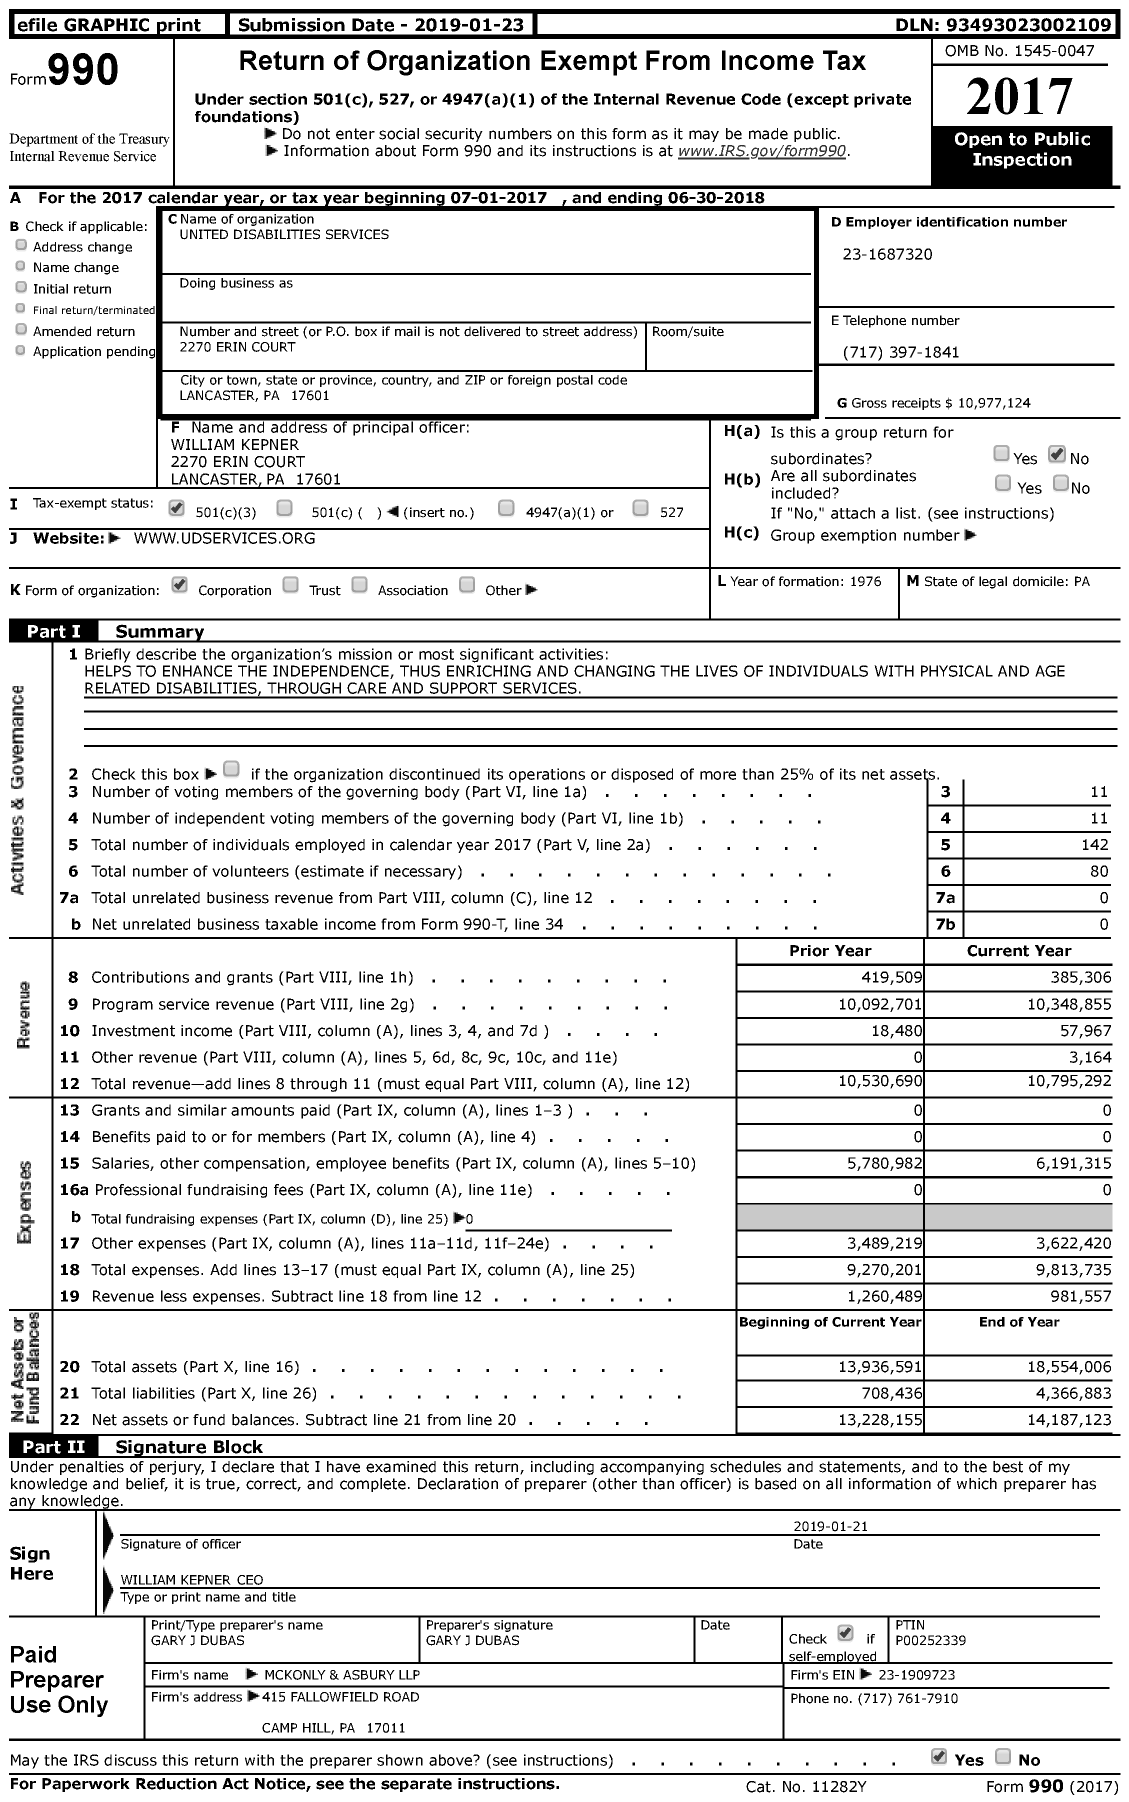 Image of first page of 2017 Form 990 for United Disabilities Services (UDS)